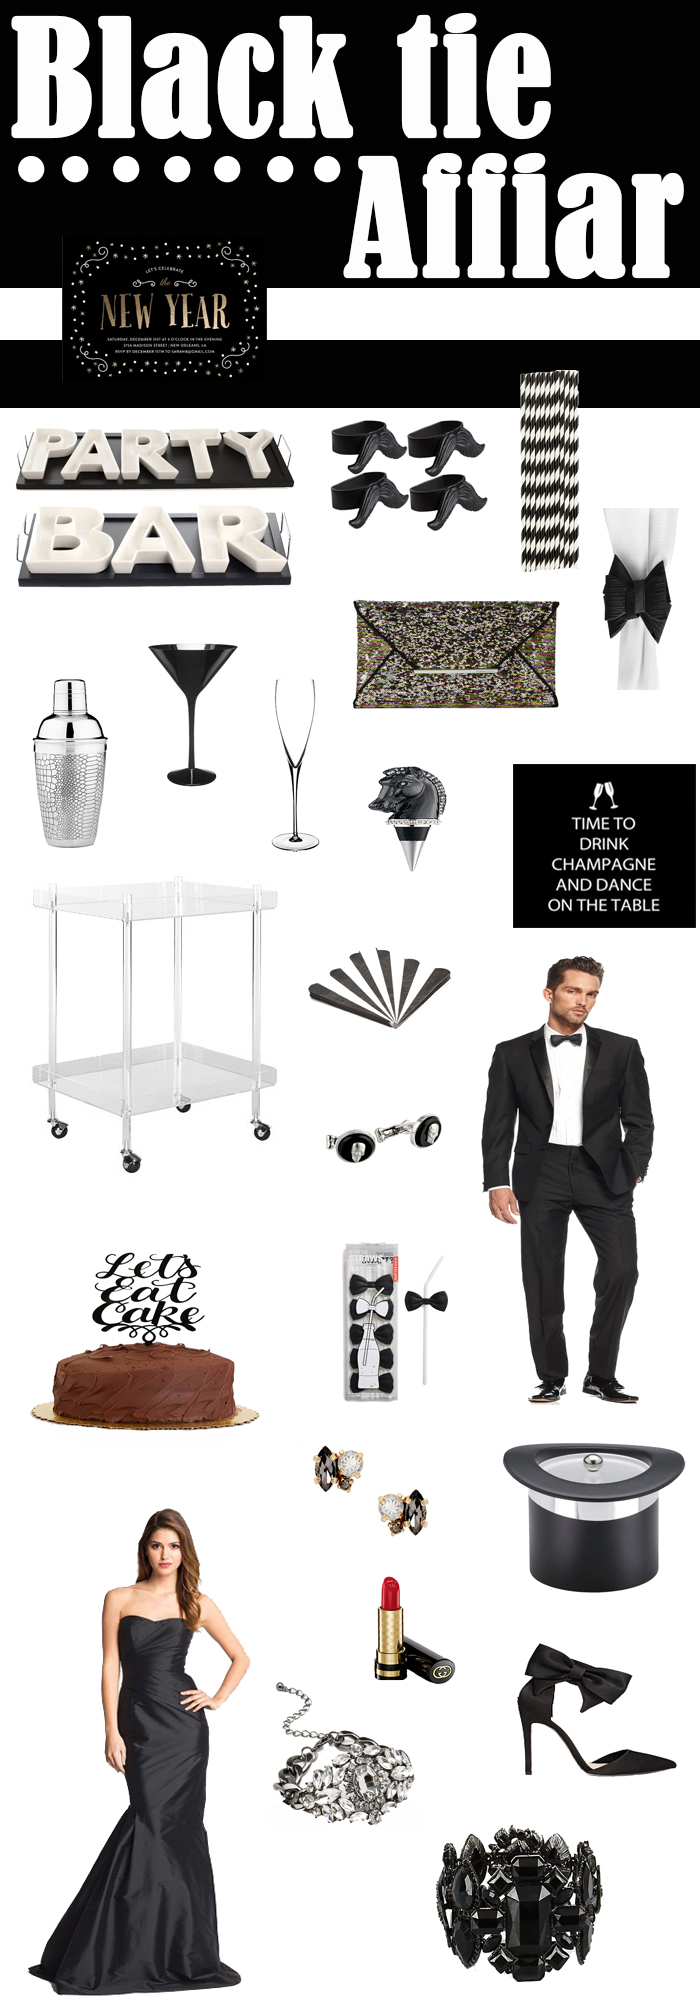 Looking for a fun NYE Party Idea? How about a Black Tie Affair Themed NYE?